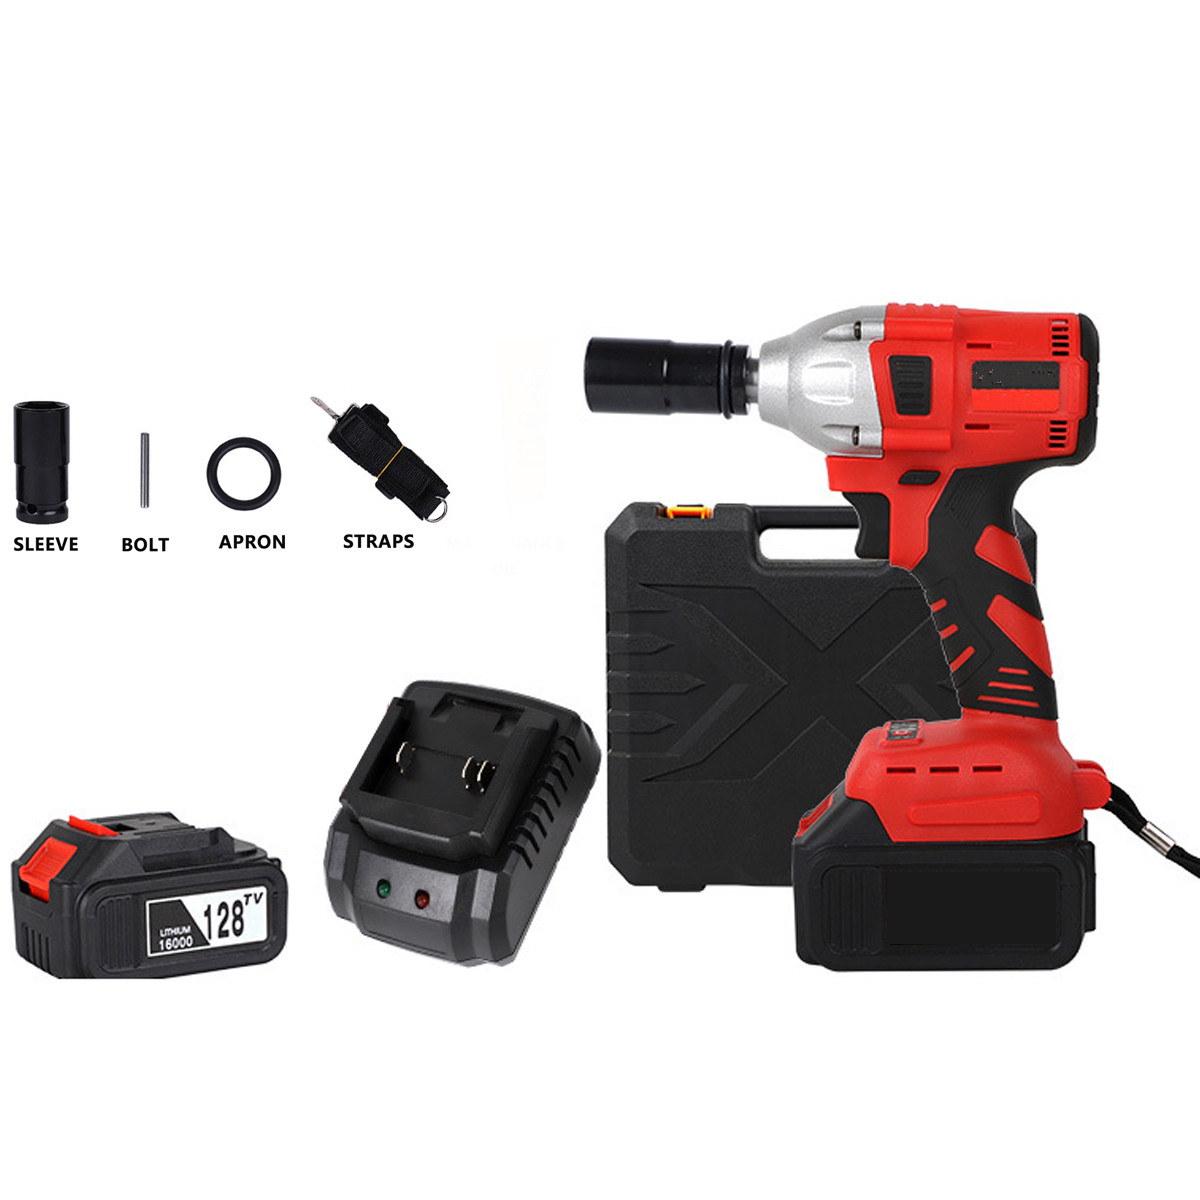 320NM-Brushless-Electric-Impact-Wrench-Socket-Wrench-with-Lithium-Battery--Charger-1374951-7